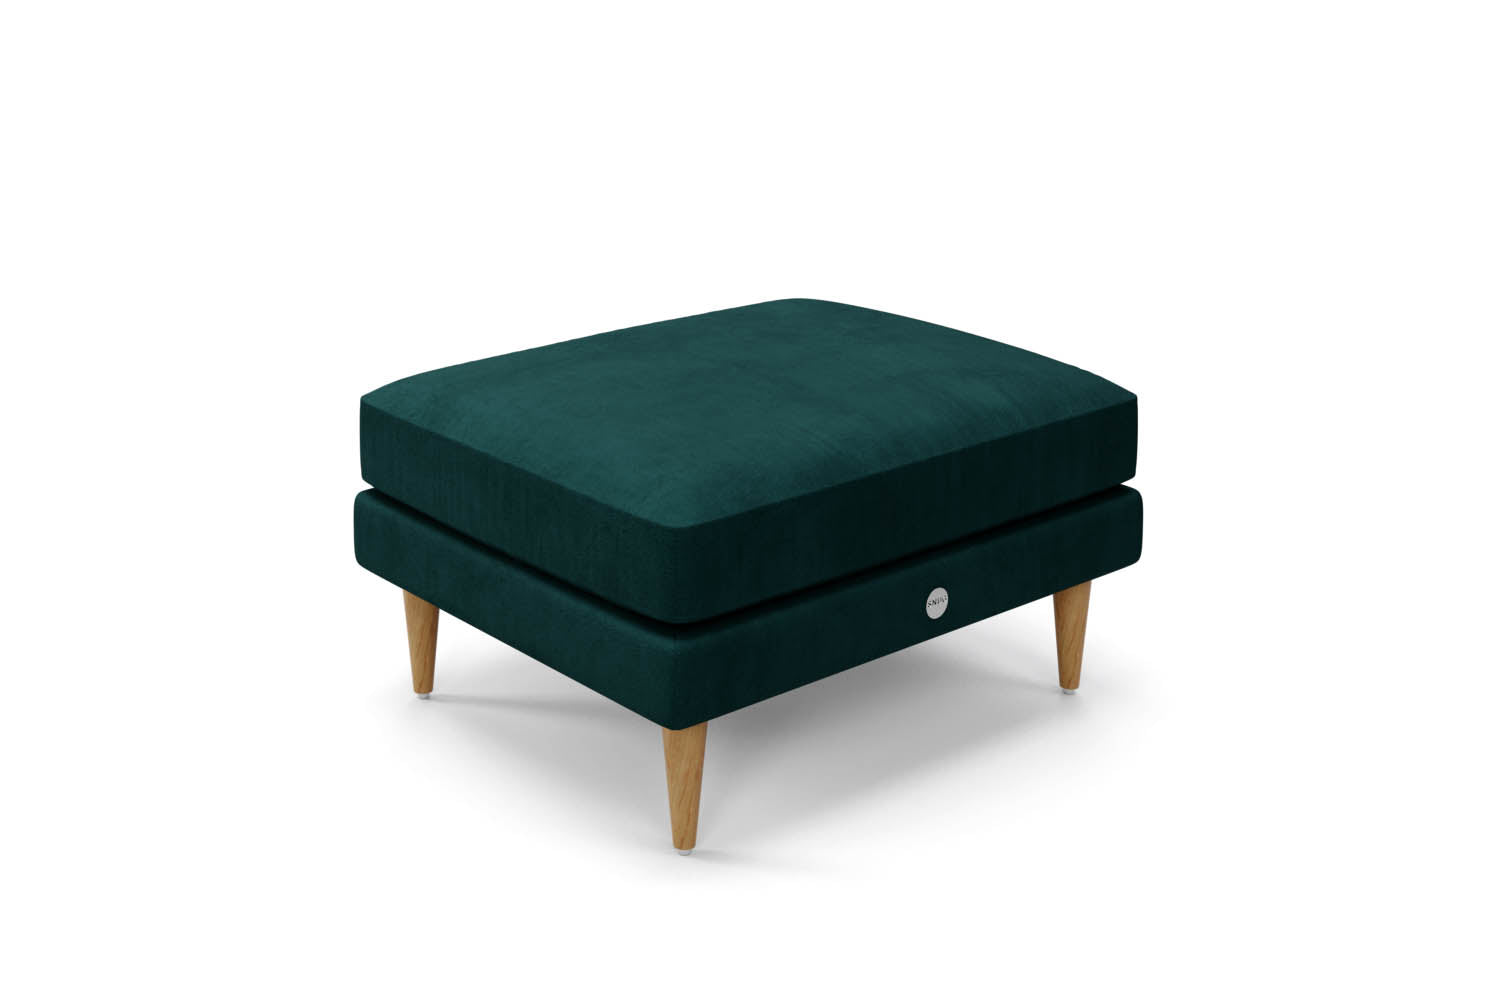 The Big Chill - Footstool - Pine Green